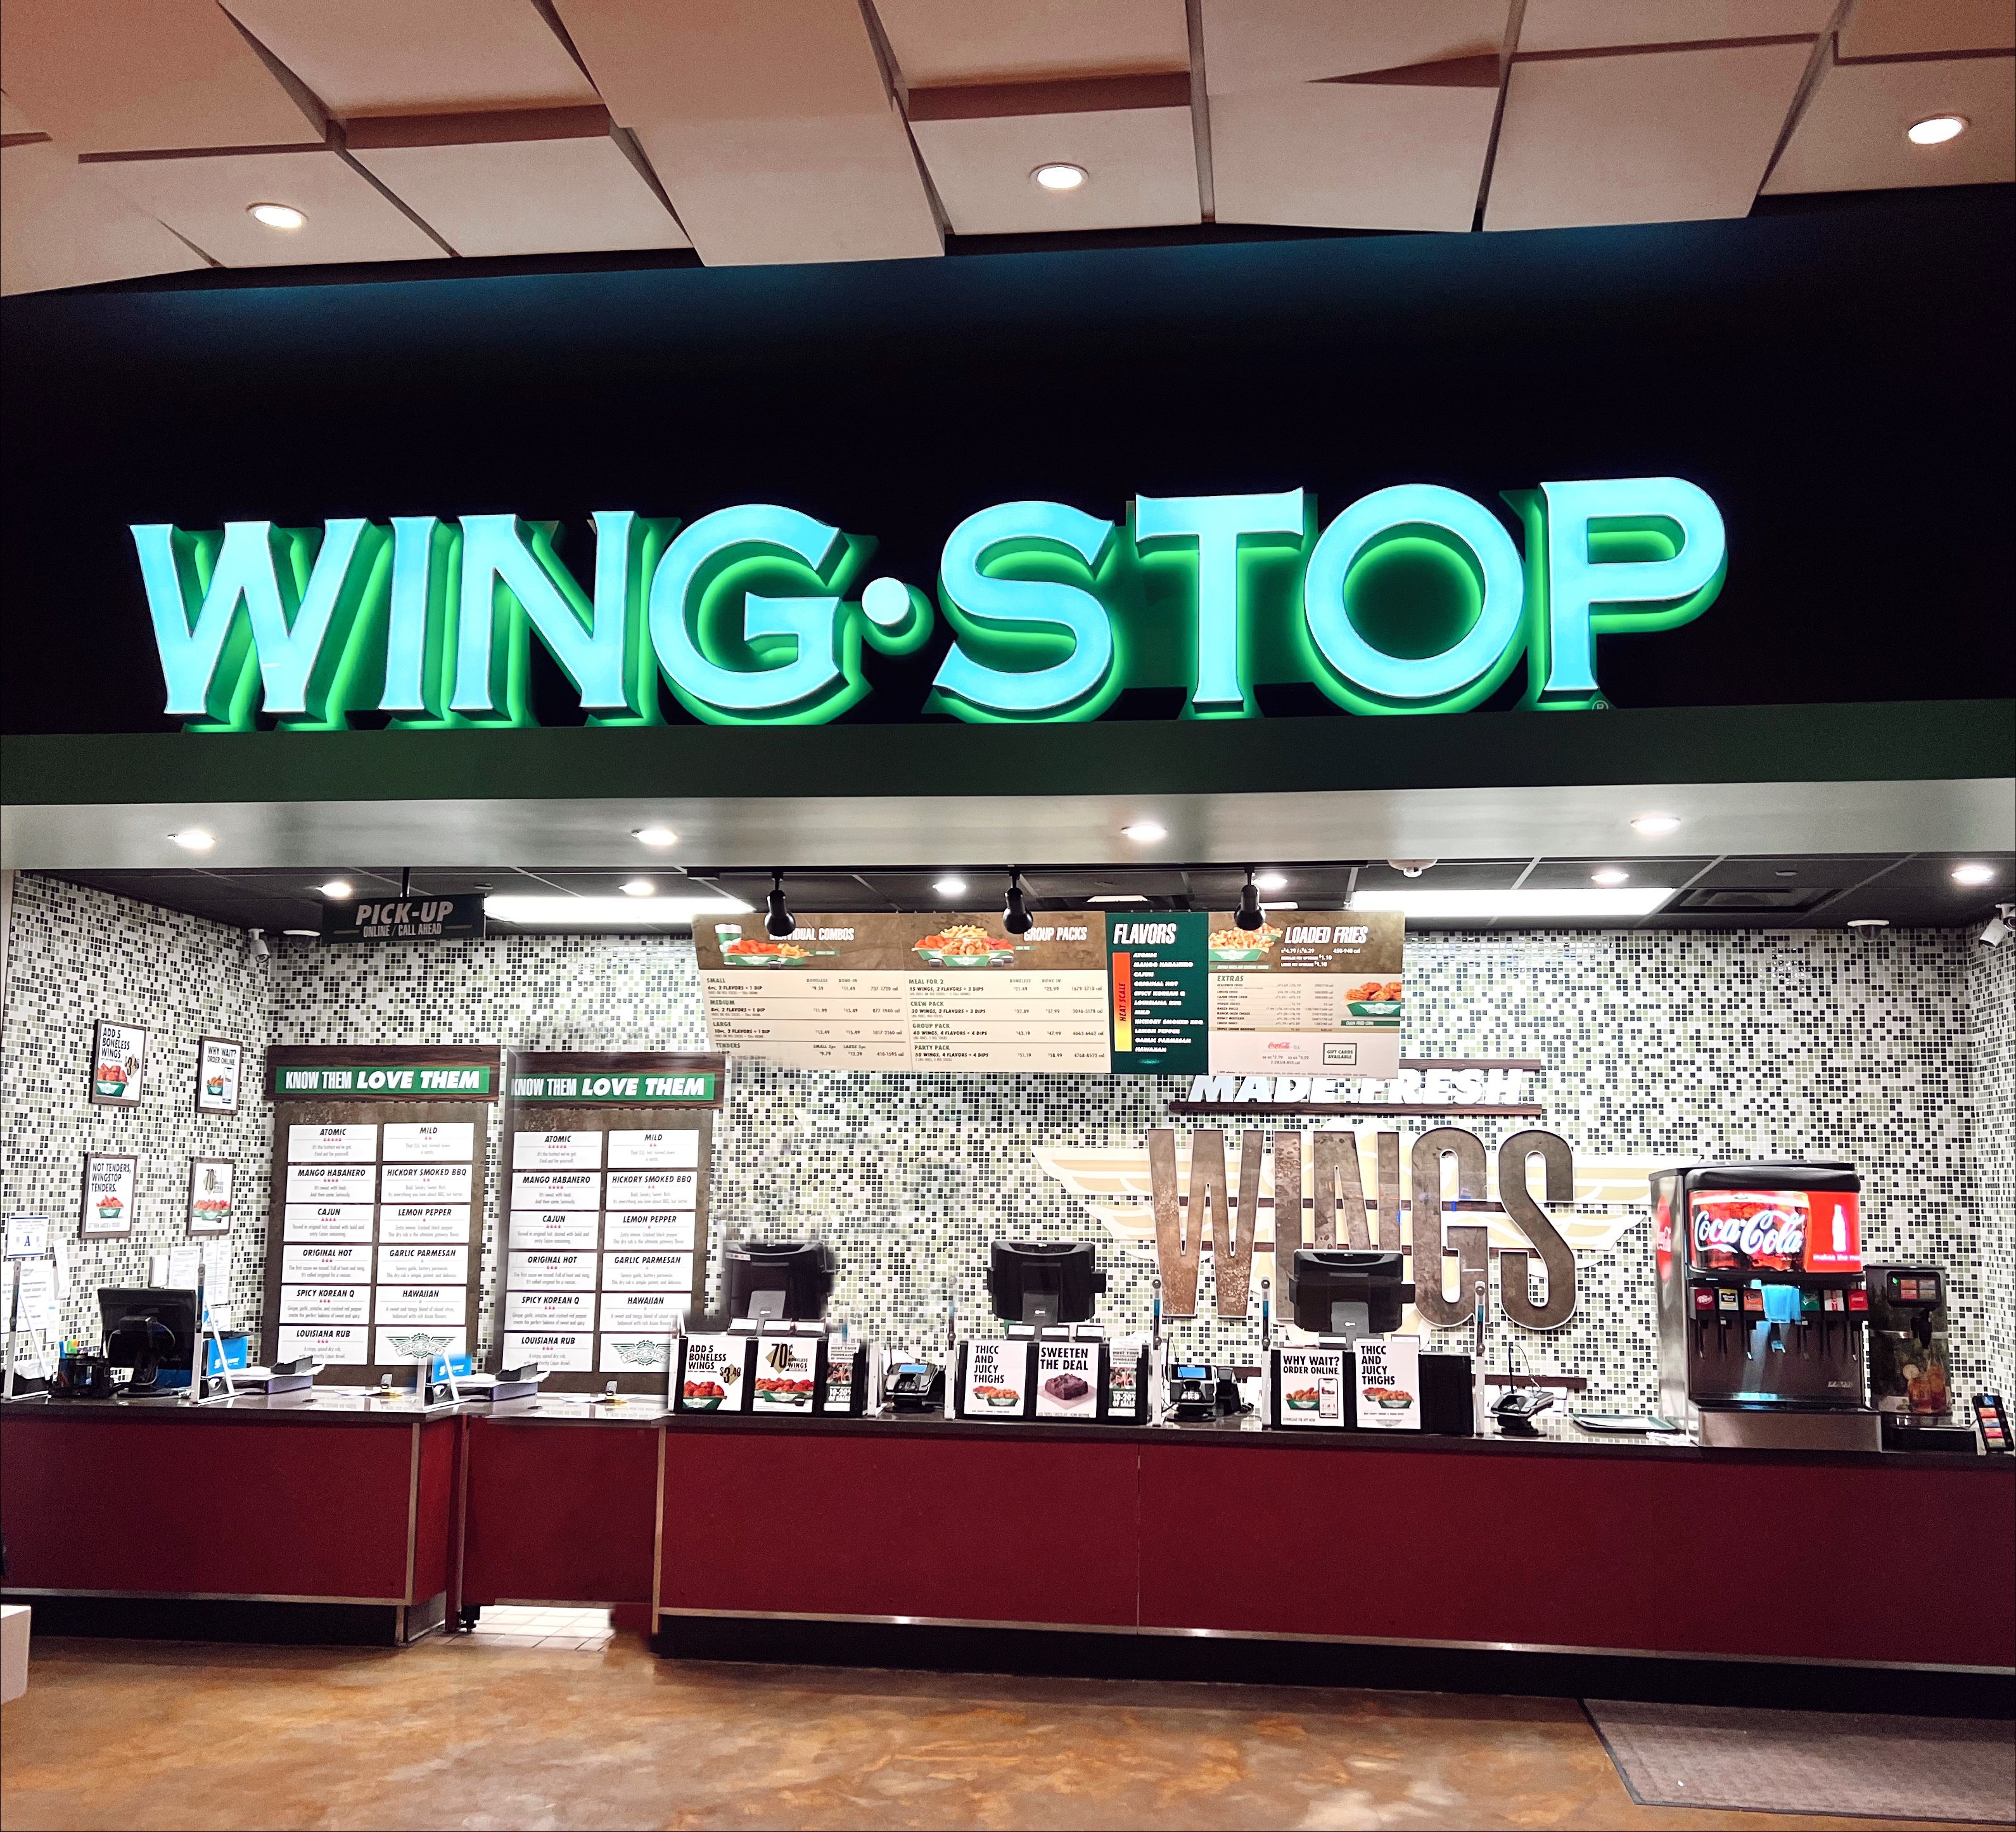 PS WING STOP